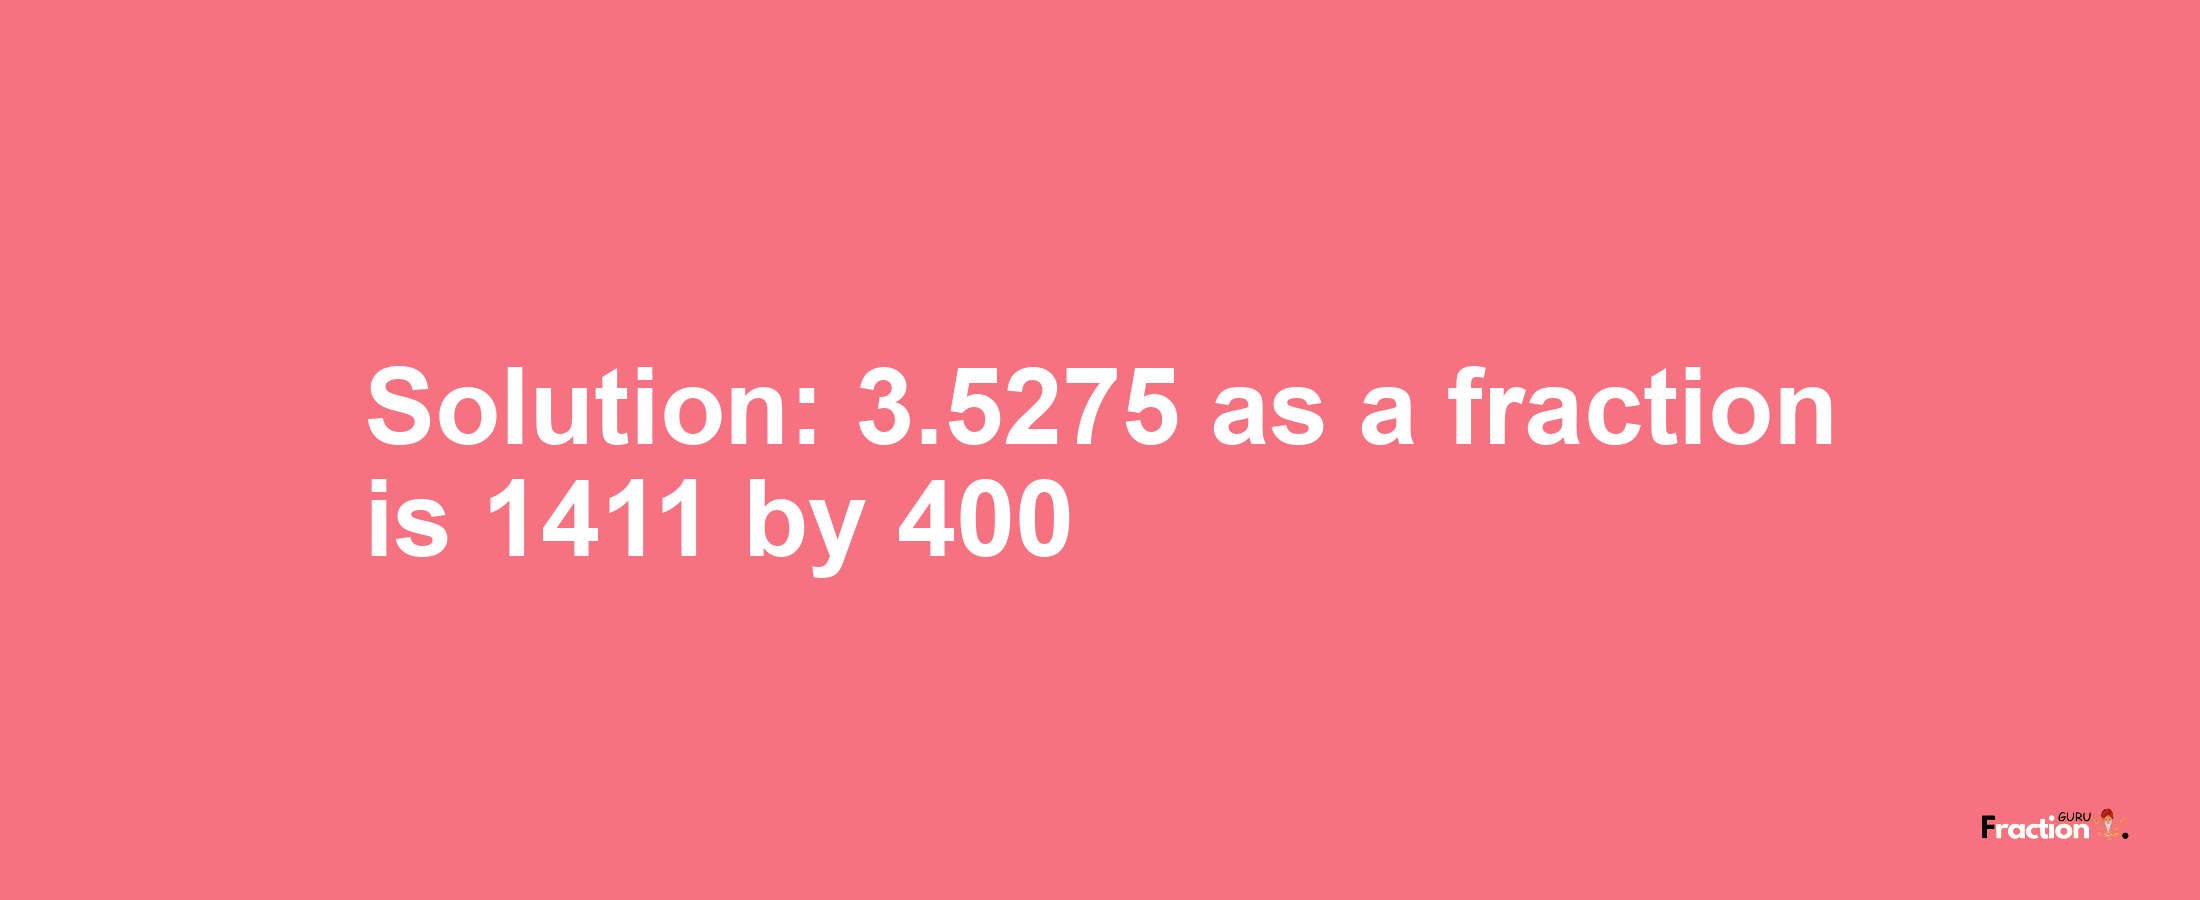 Solution:3.5275 as a fraction is 1411/400